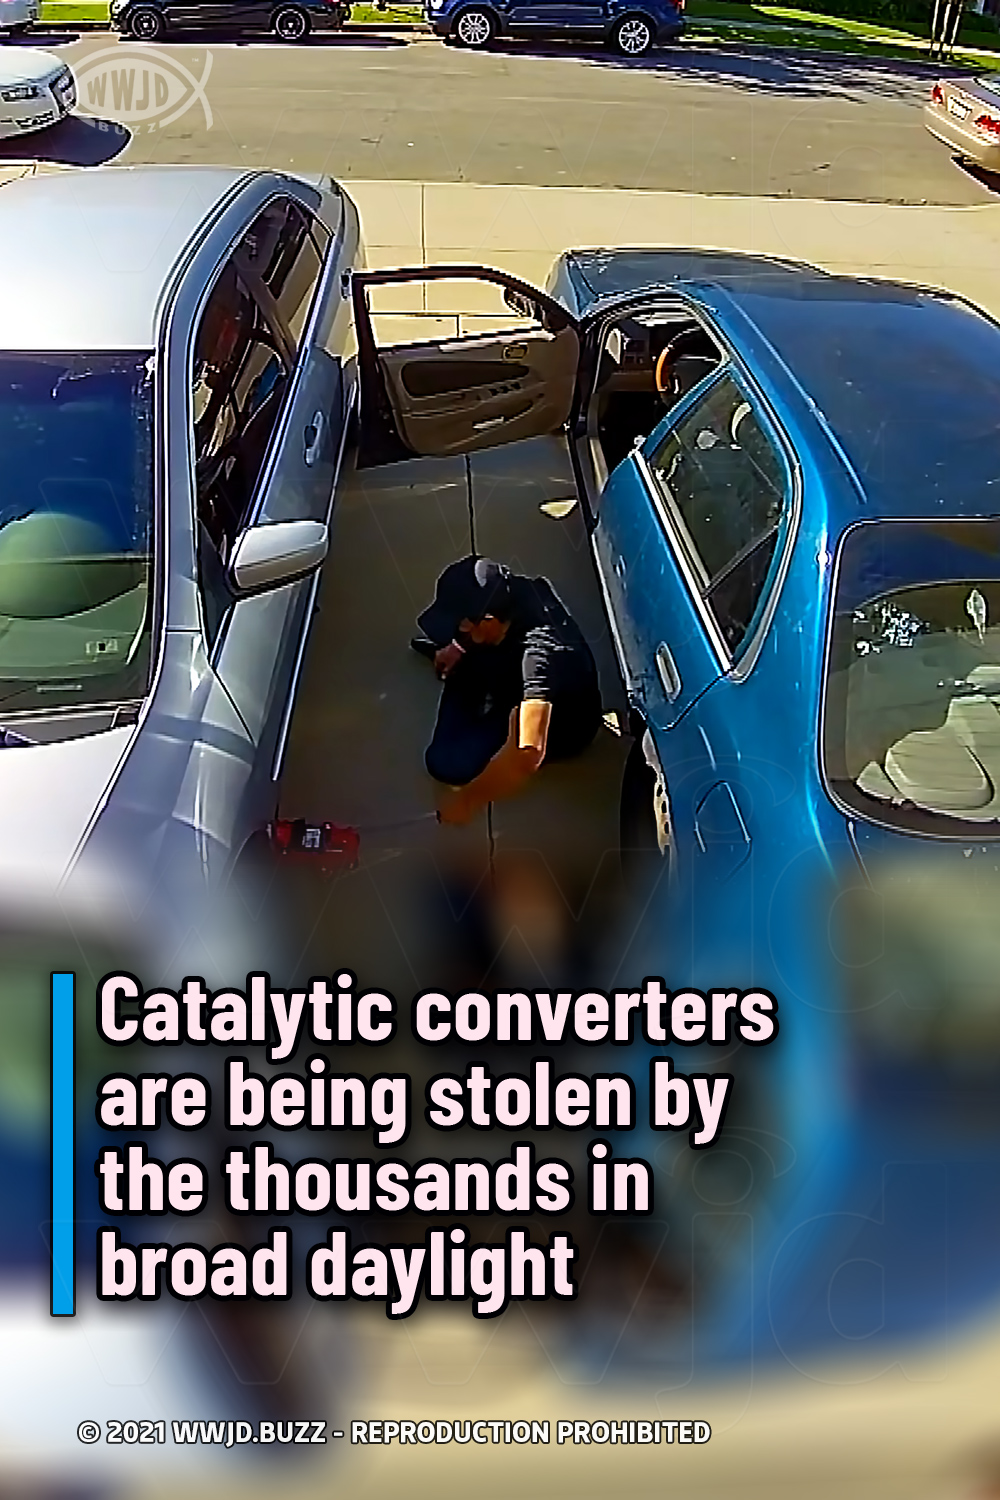 Catalytic converters are being stolen by the thousands in broad daylight